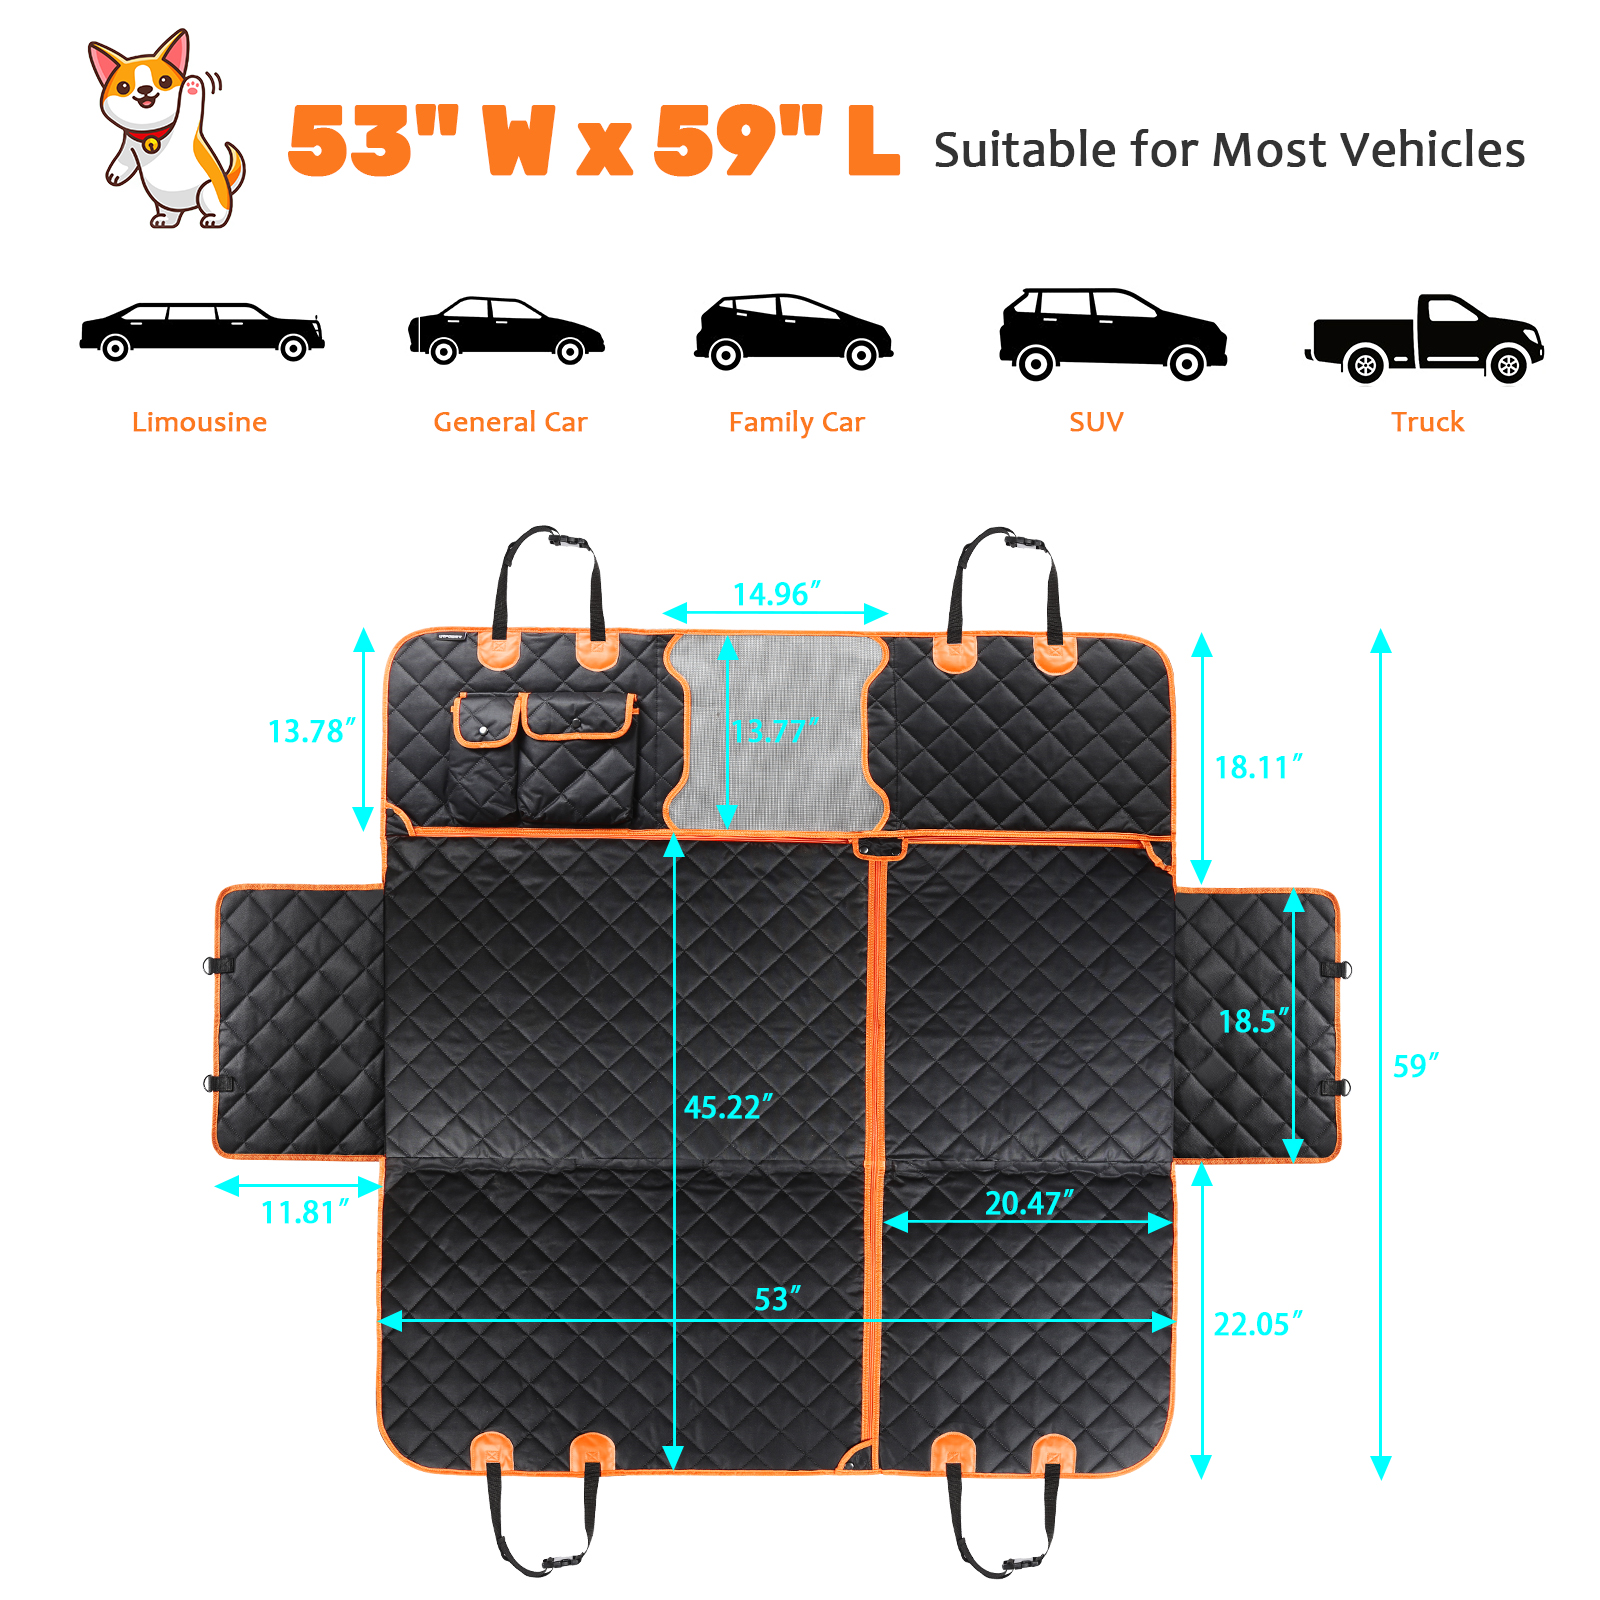 URPOWER 4-in-1 Convertible Dog Car Seat Cover 100% Waterproof Dog Seat Cover Nonslip Dog Hammock 600D Heavy Scratchproof Pet Seat Cover for Cars Back Seat with Mesh Window for Cars Trucks and SUVs